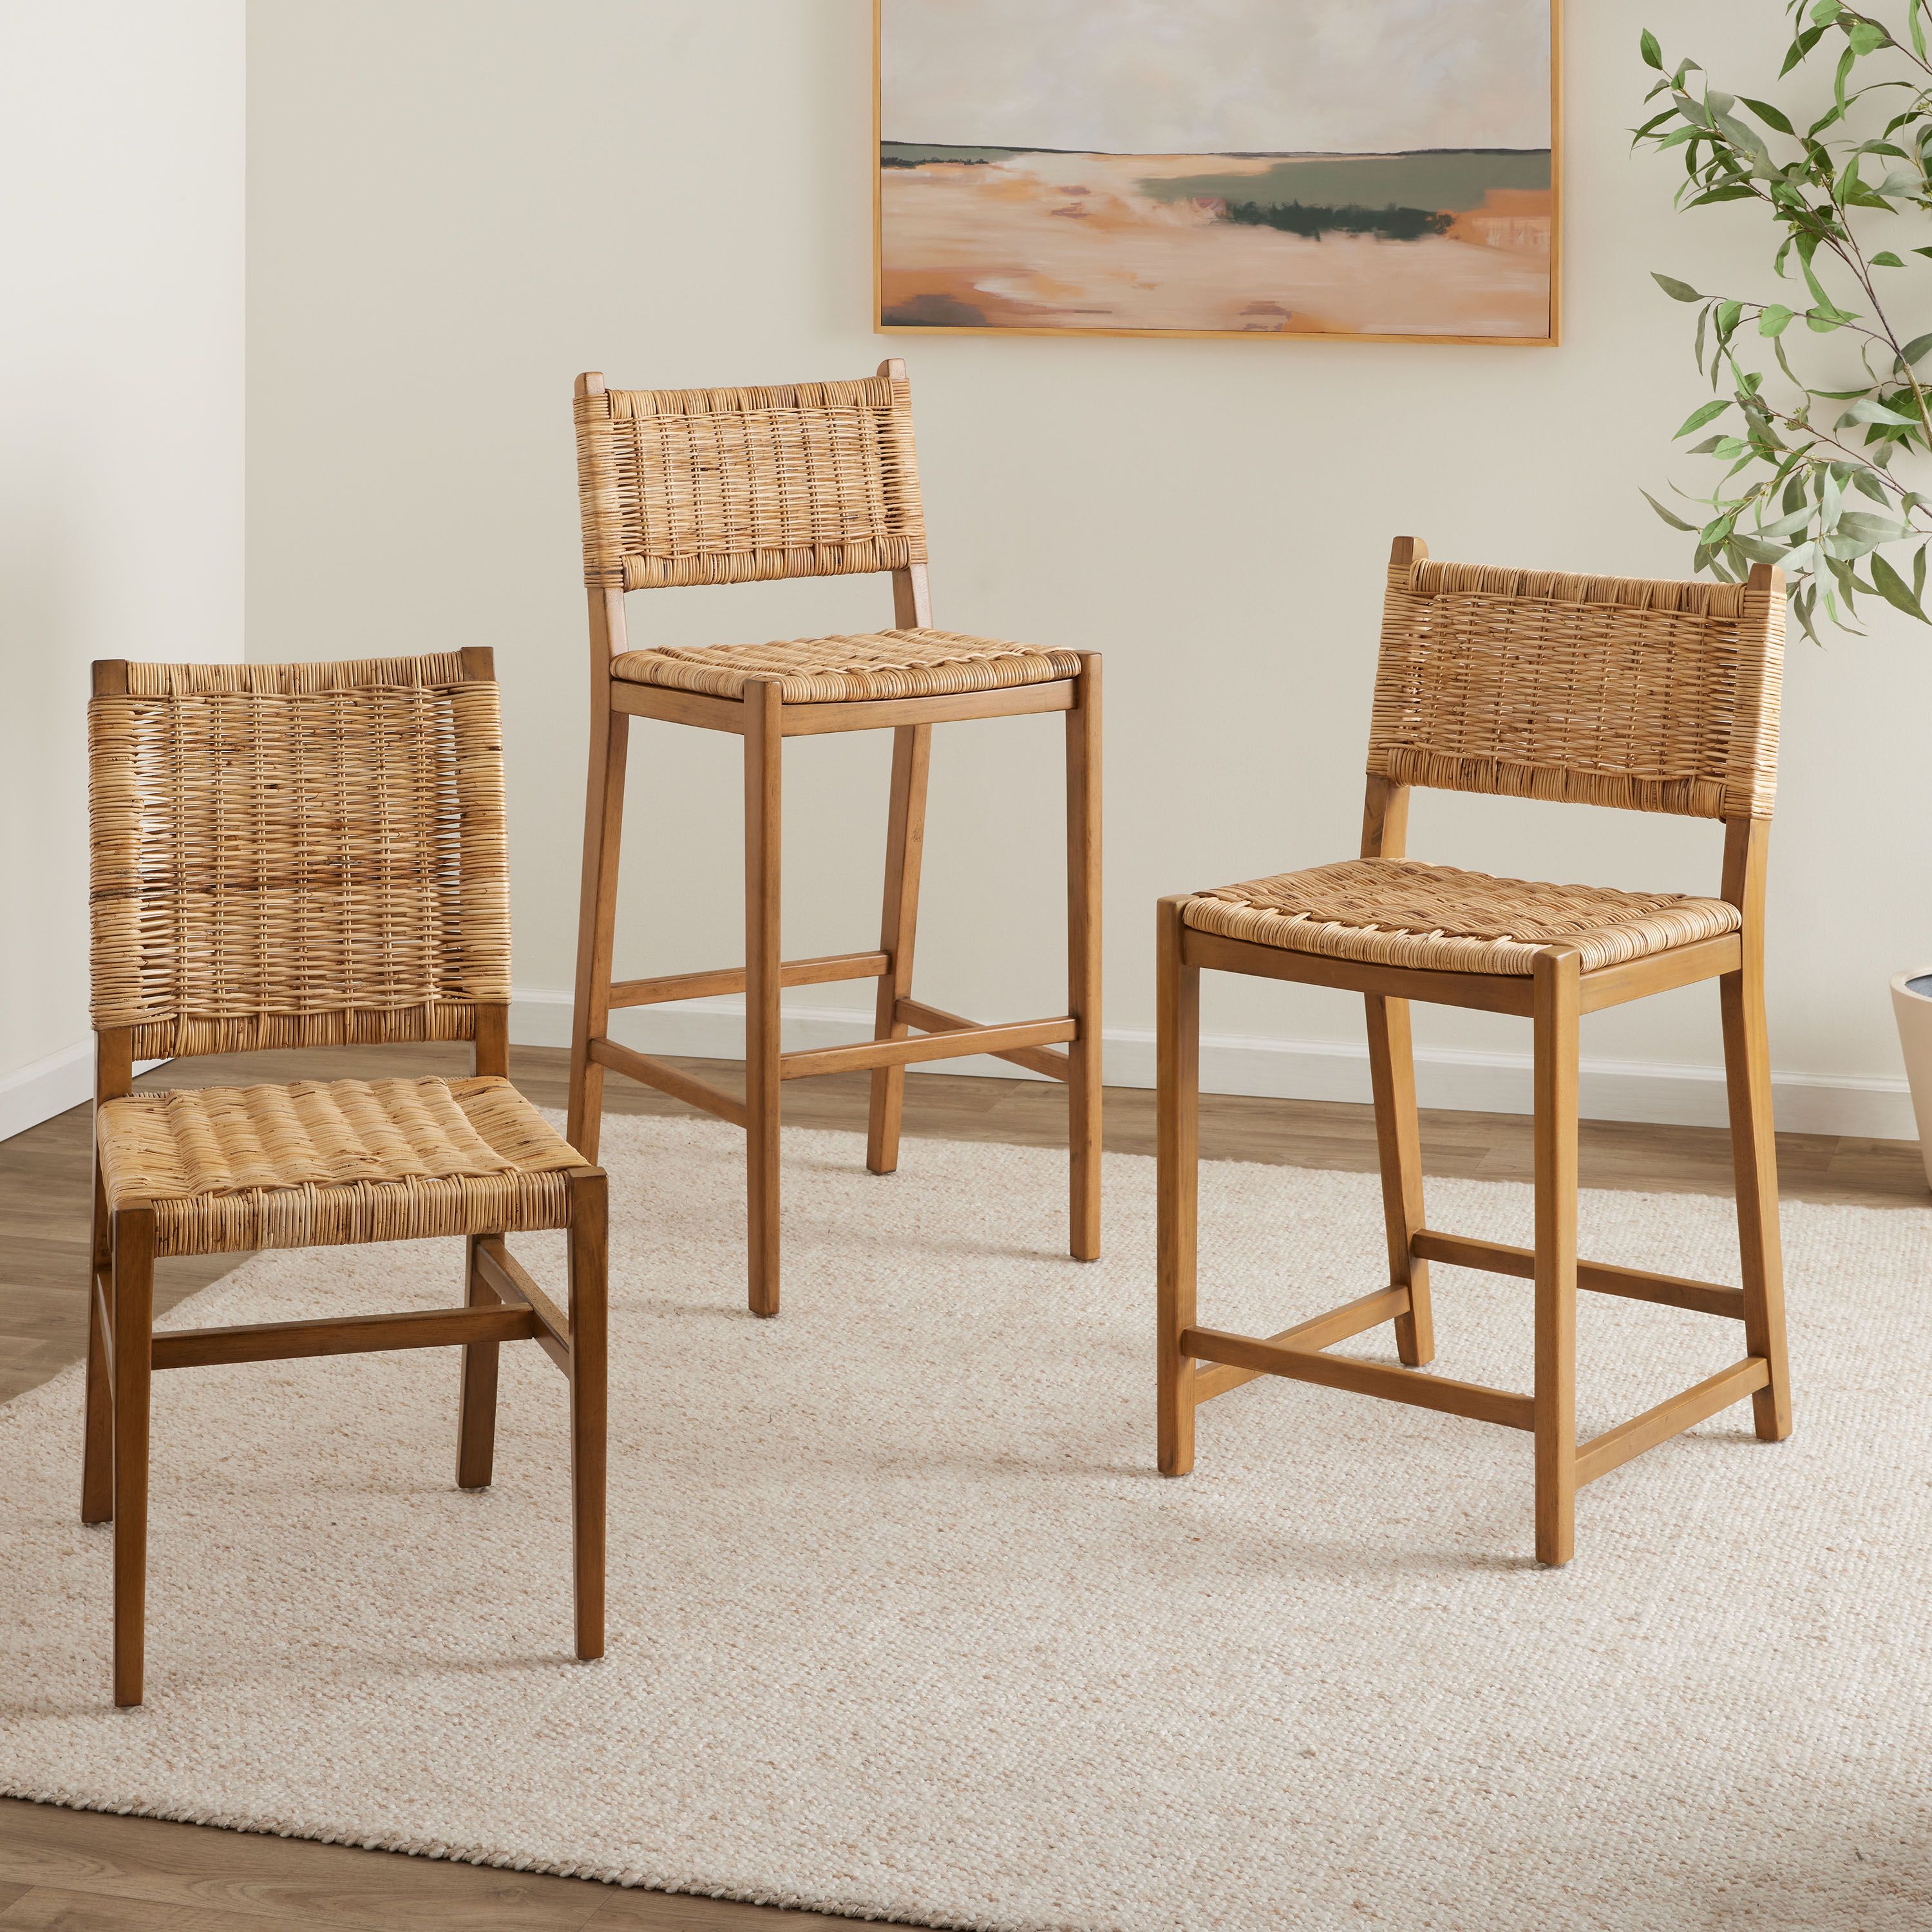 Amolea Wood and Rattan Dining Seat Collection | World Market